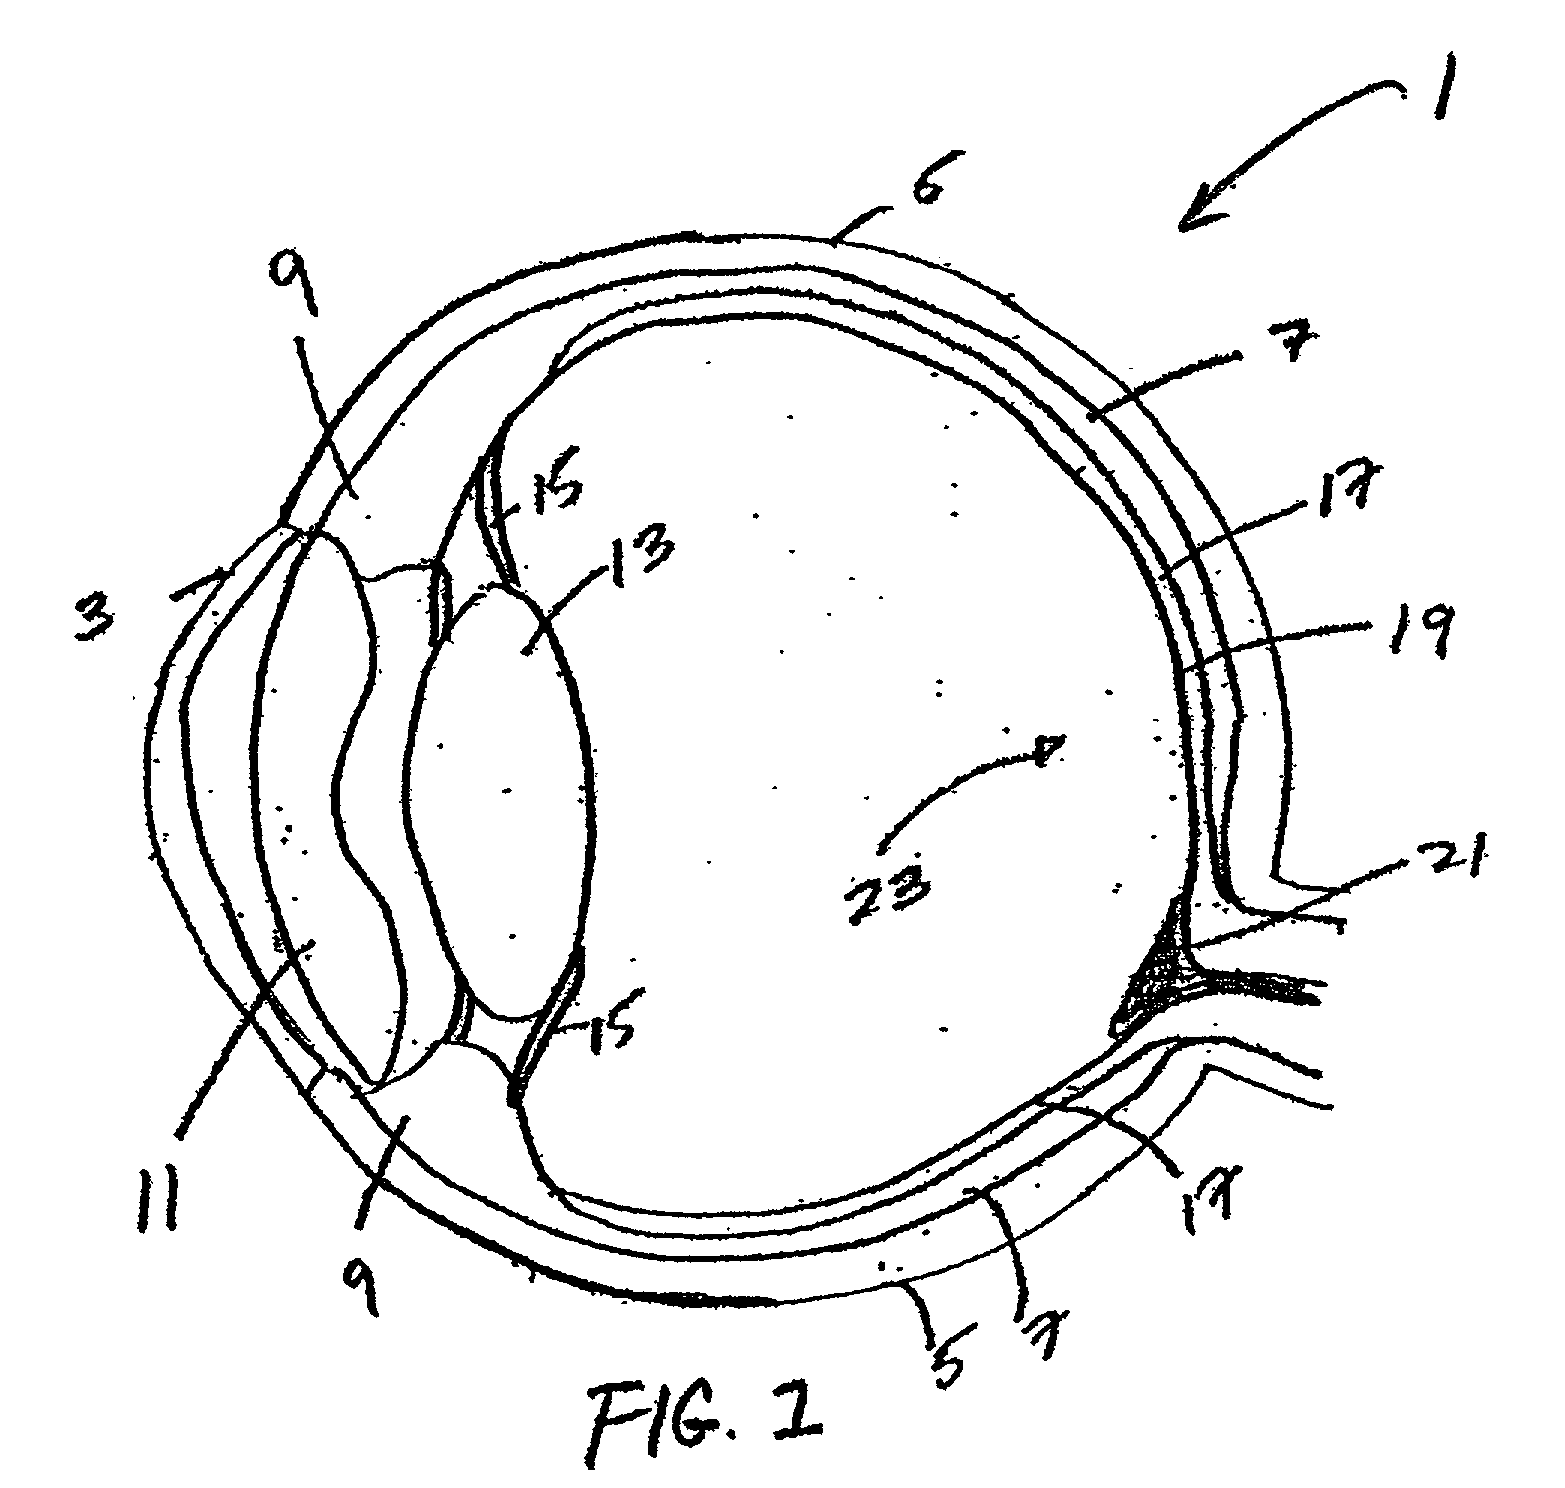 Ophthalmic instrument having adaptive optic subsystem with multiple stage phase compensator